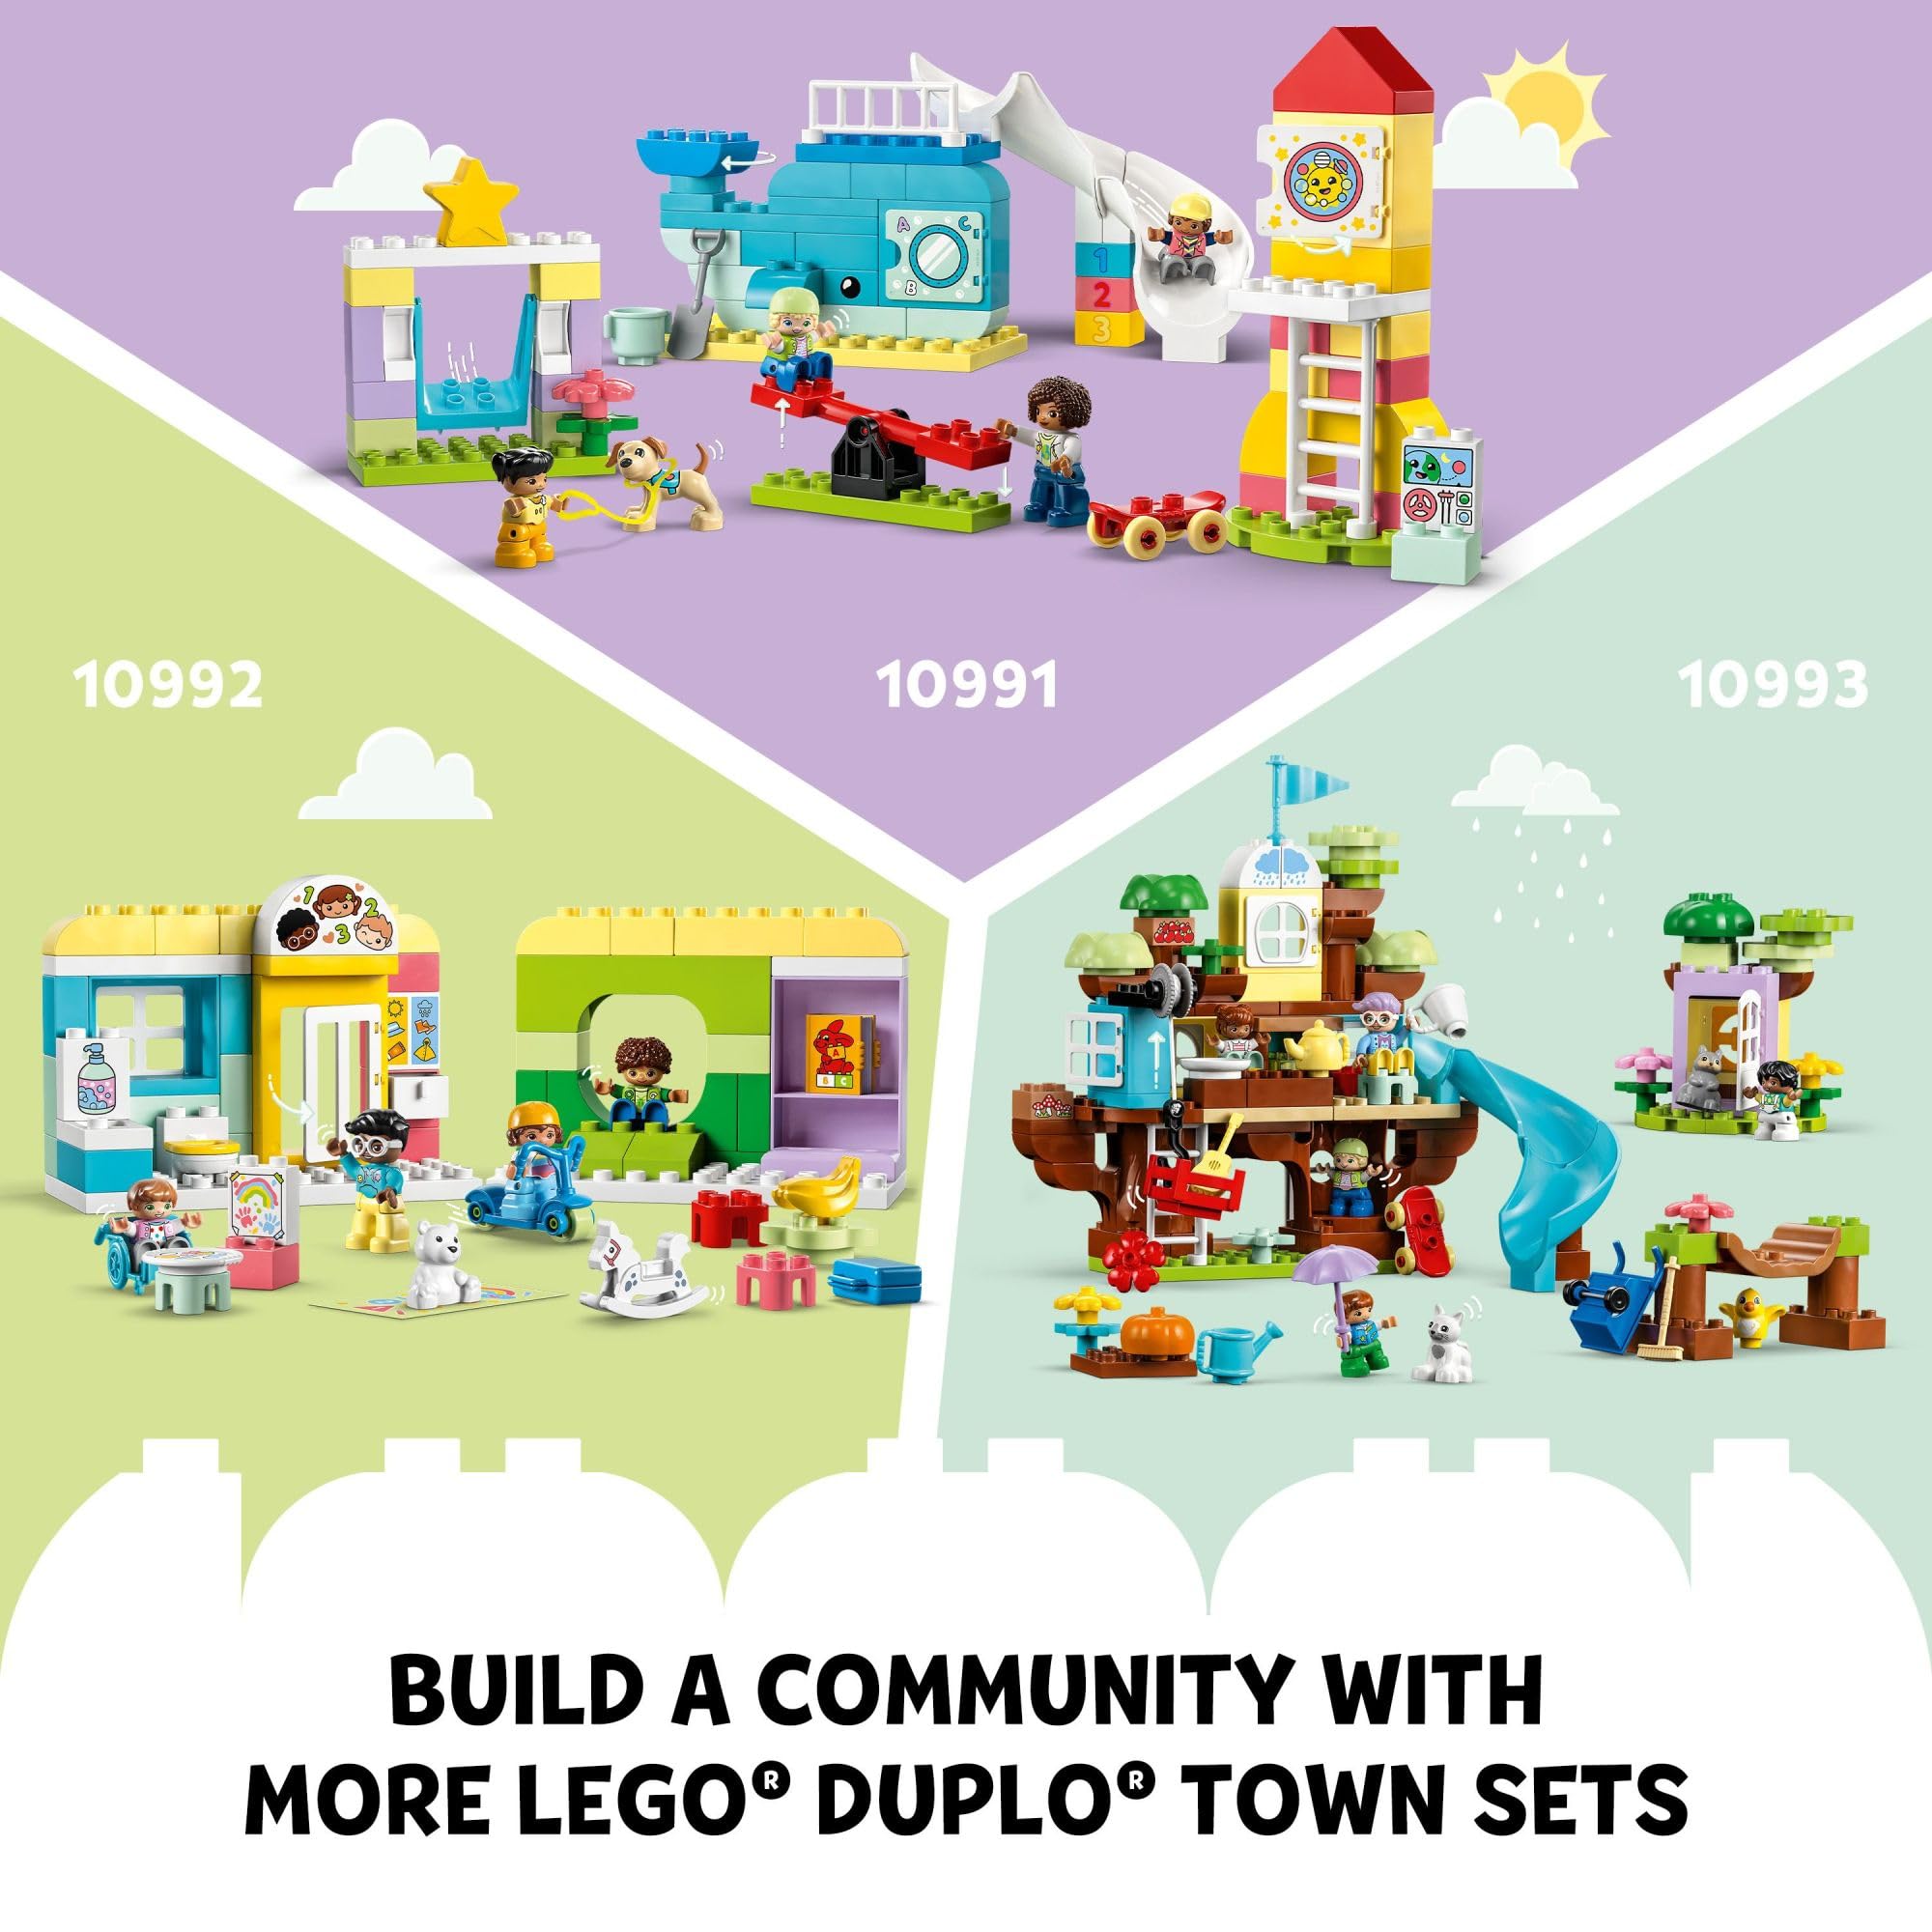 LEGO DUPLO Town 3in1 Family House 10994 Educational STEM Building Toy Set for Toddlers Ages 3+, Car Toy and 3 Floor House Lets The Whole Family Build, Play and Learn